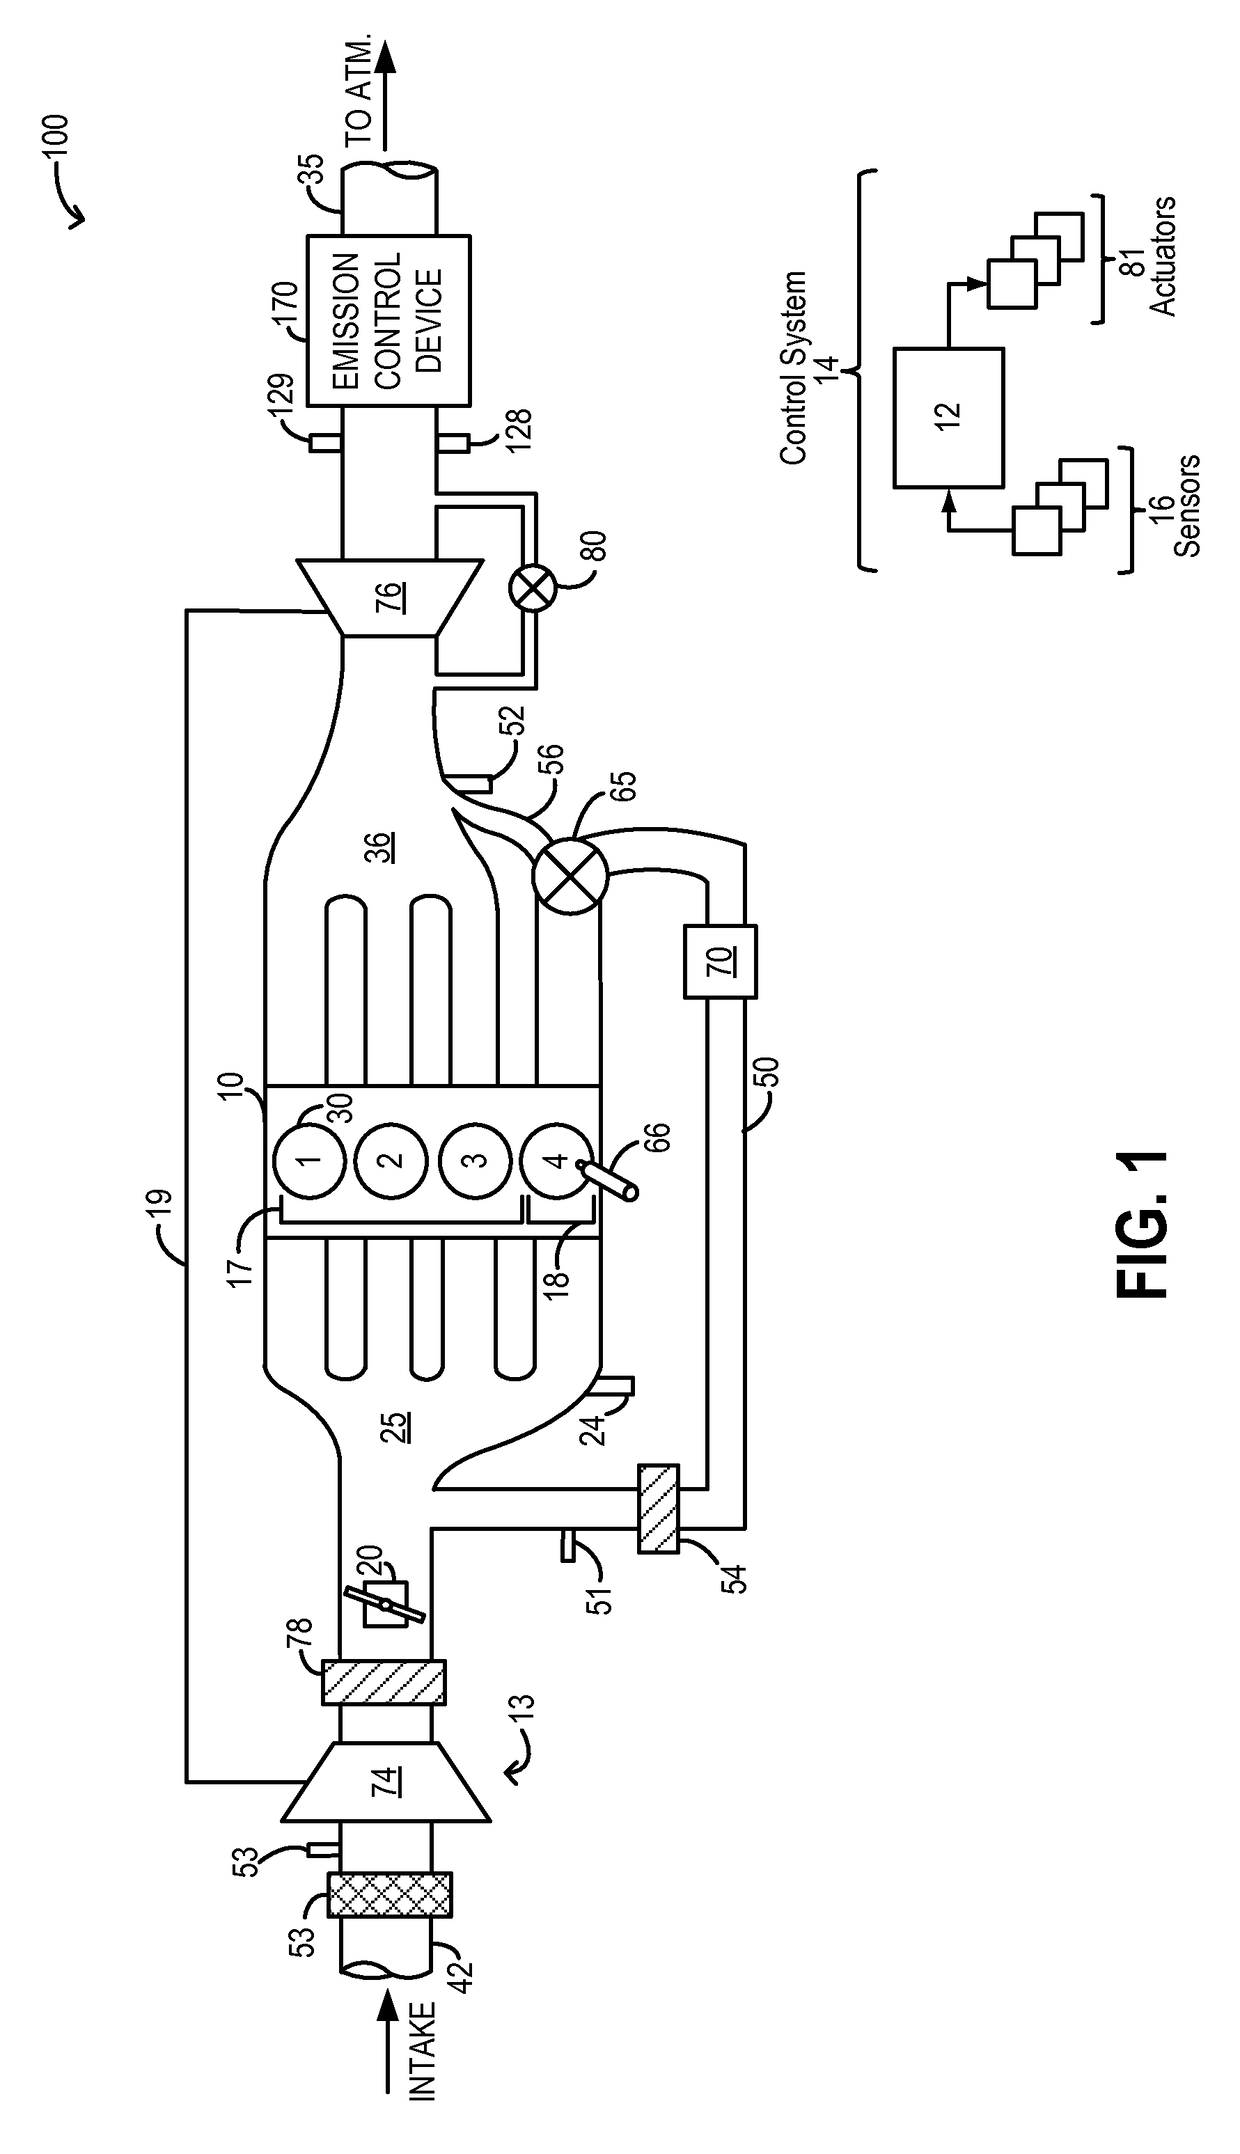 Systems and methods for transient control